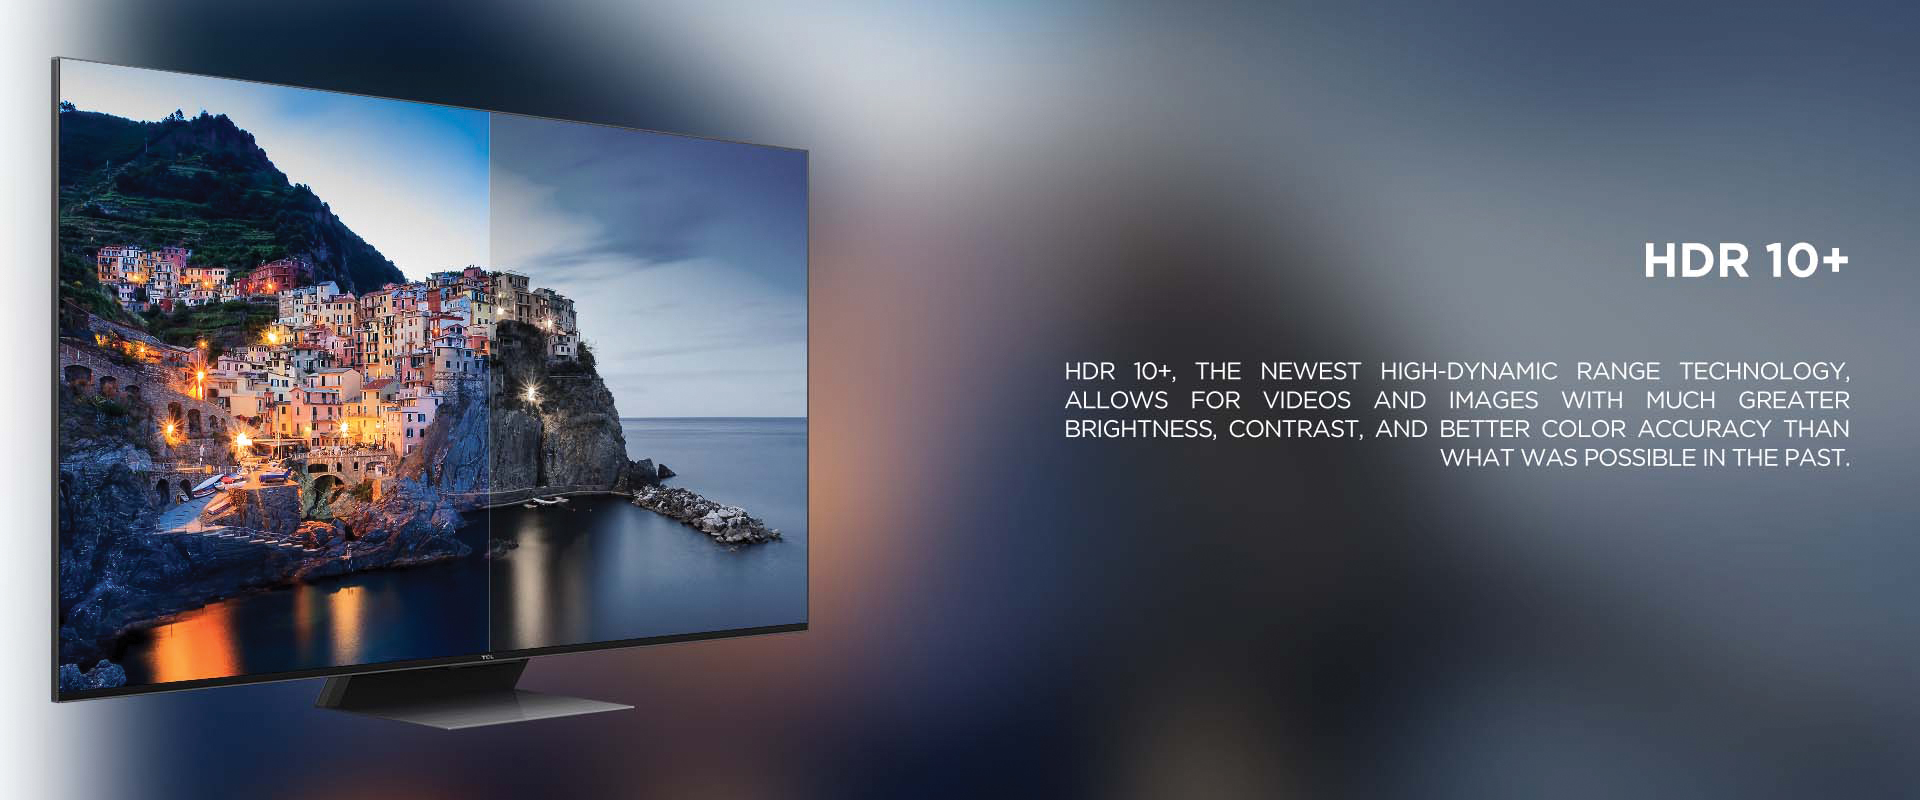 HDR 10+ - HDR 10+, the newest high-dynamic range technology, allows for videos and images with much greater brightness, contrast, and better color accuracy than what was possible in the past.